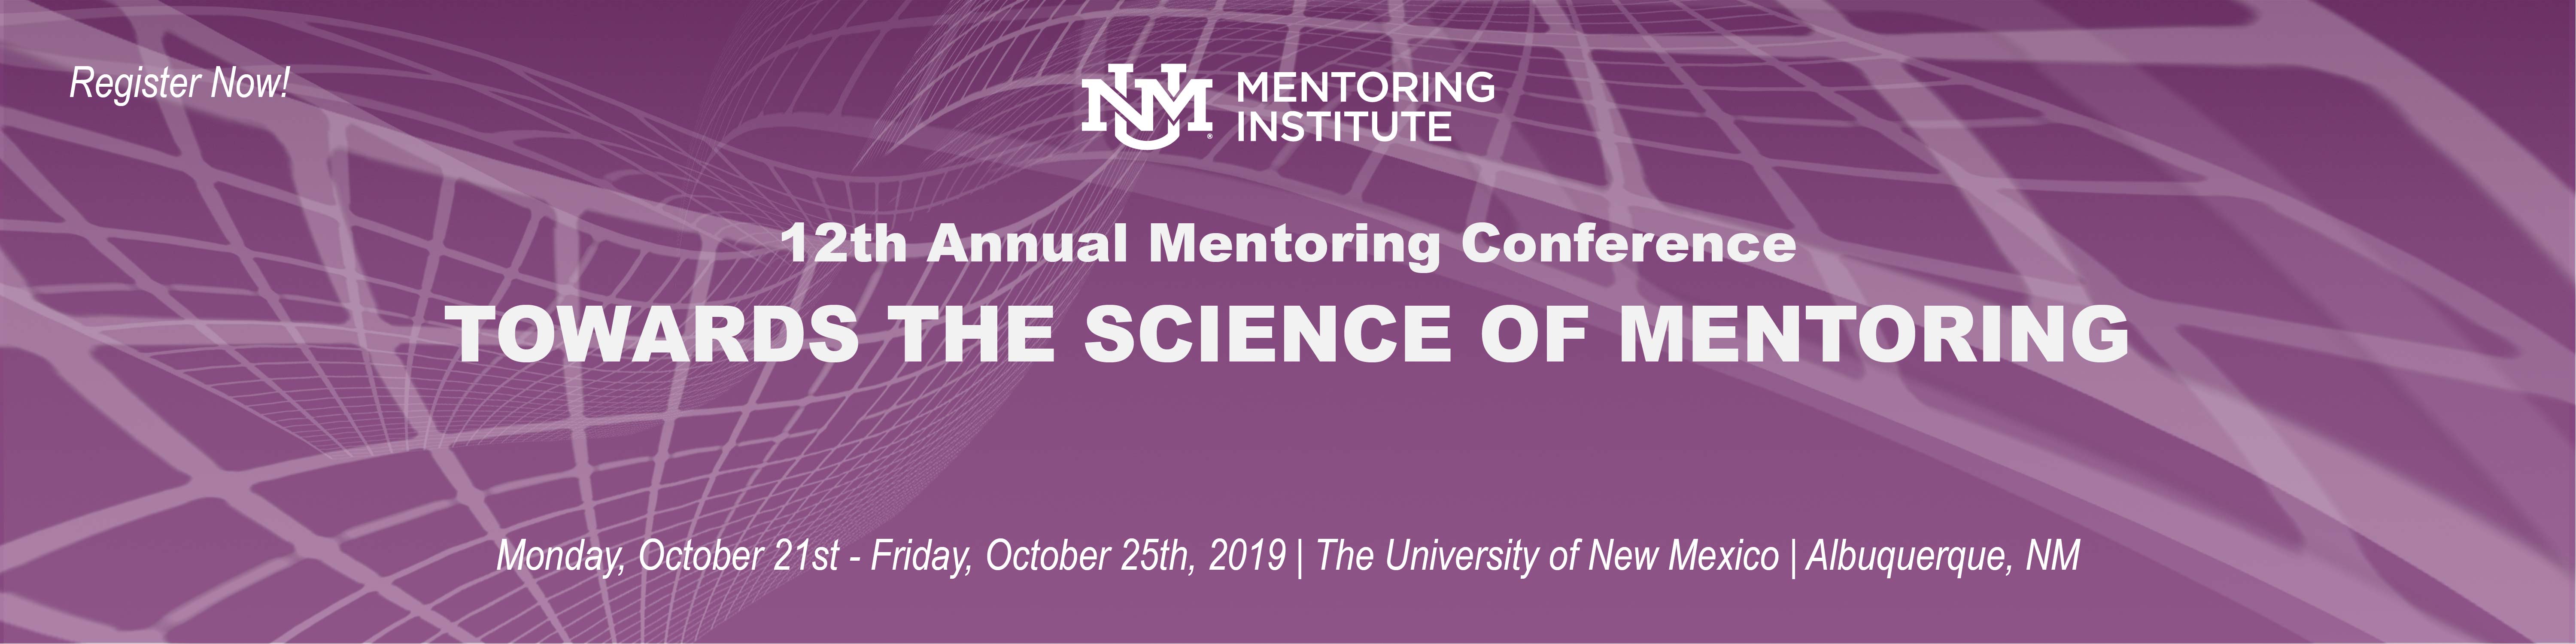 Mentoring Institute Conference 2019